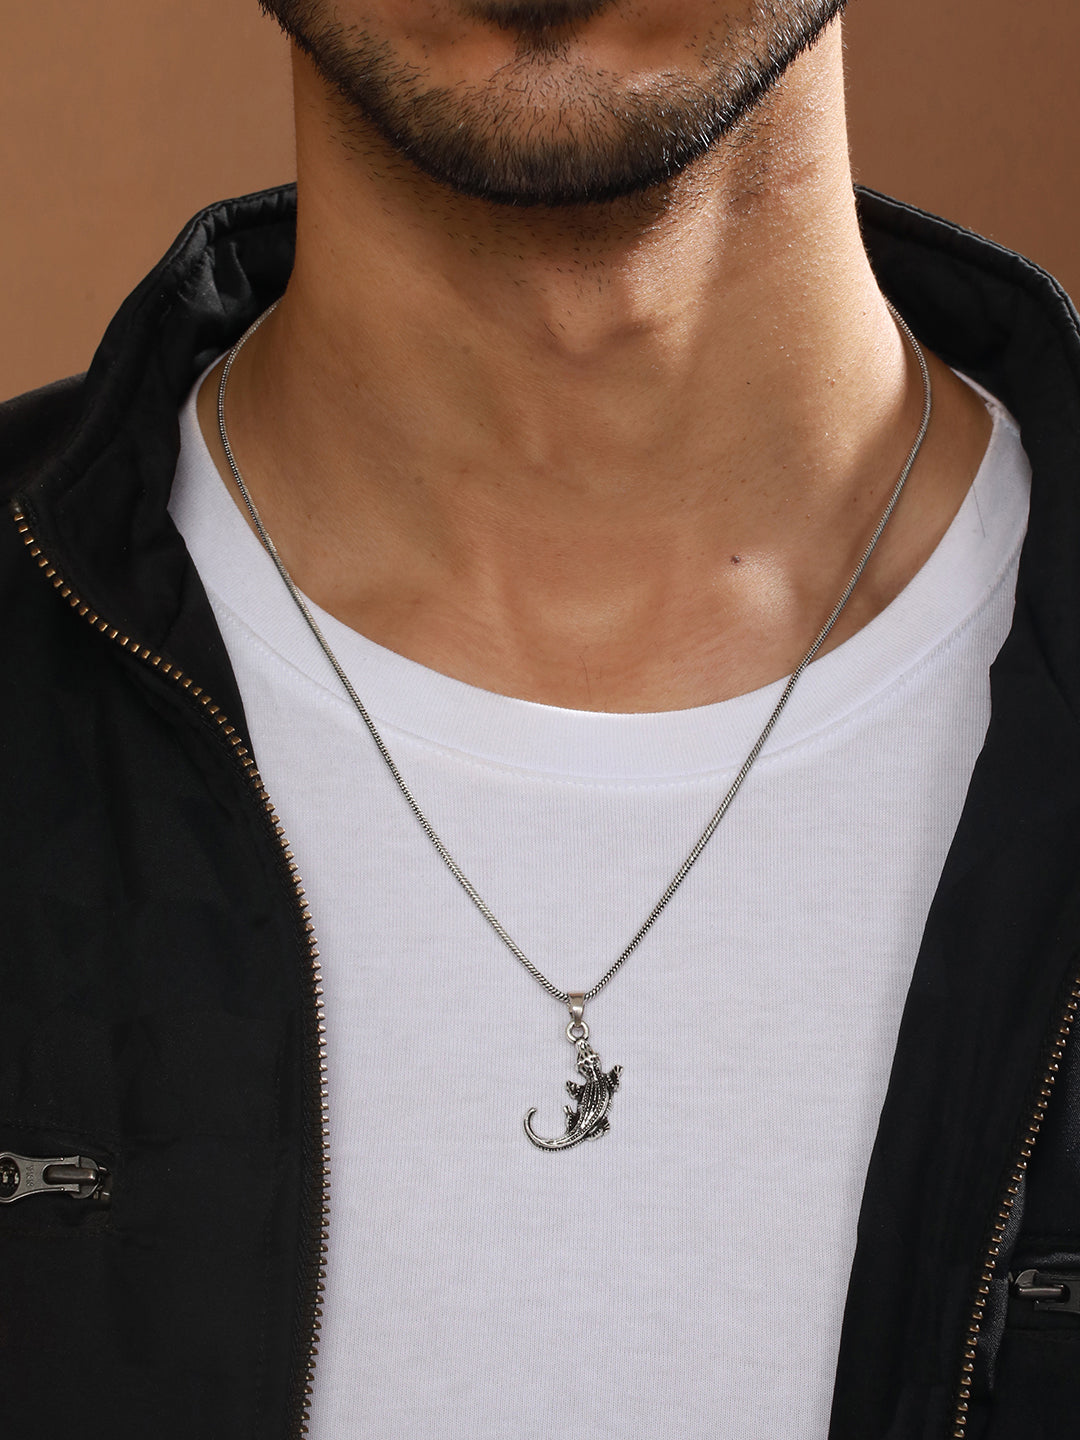 Bold by Priyaasi Crawling Lizard Silver-Plated Pendant Chain for Men